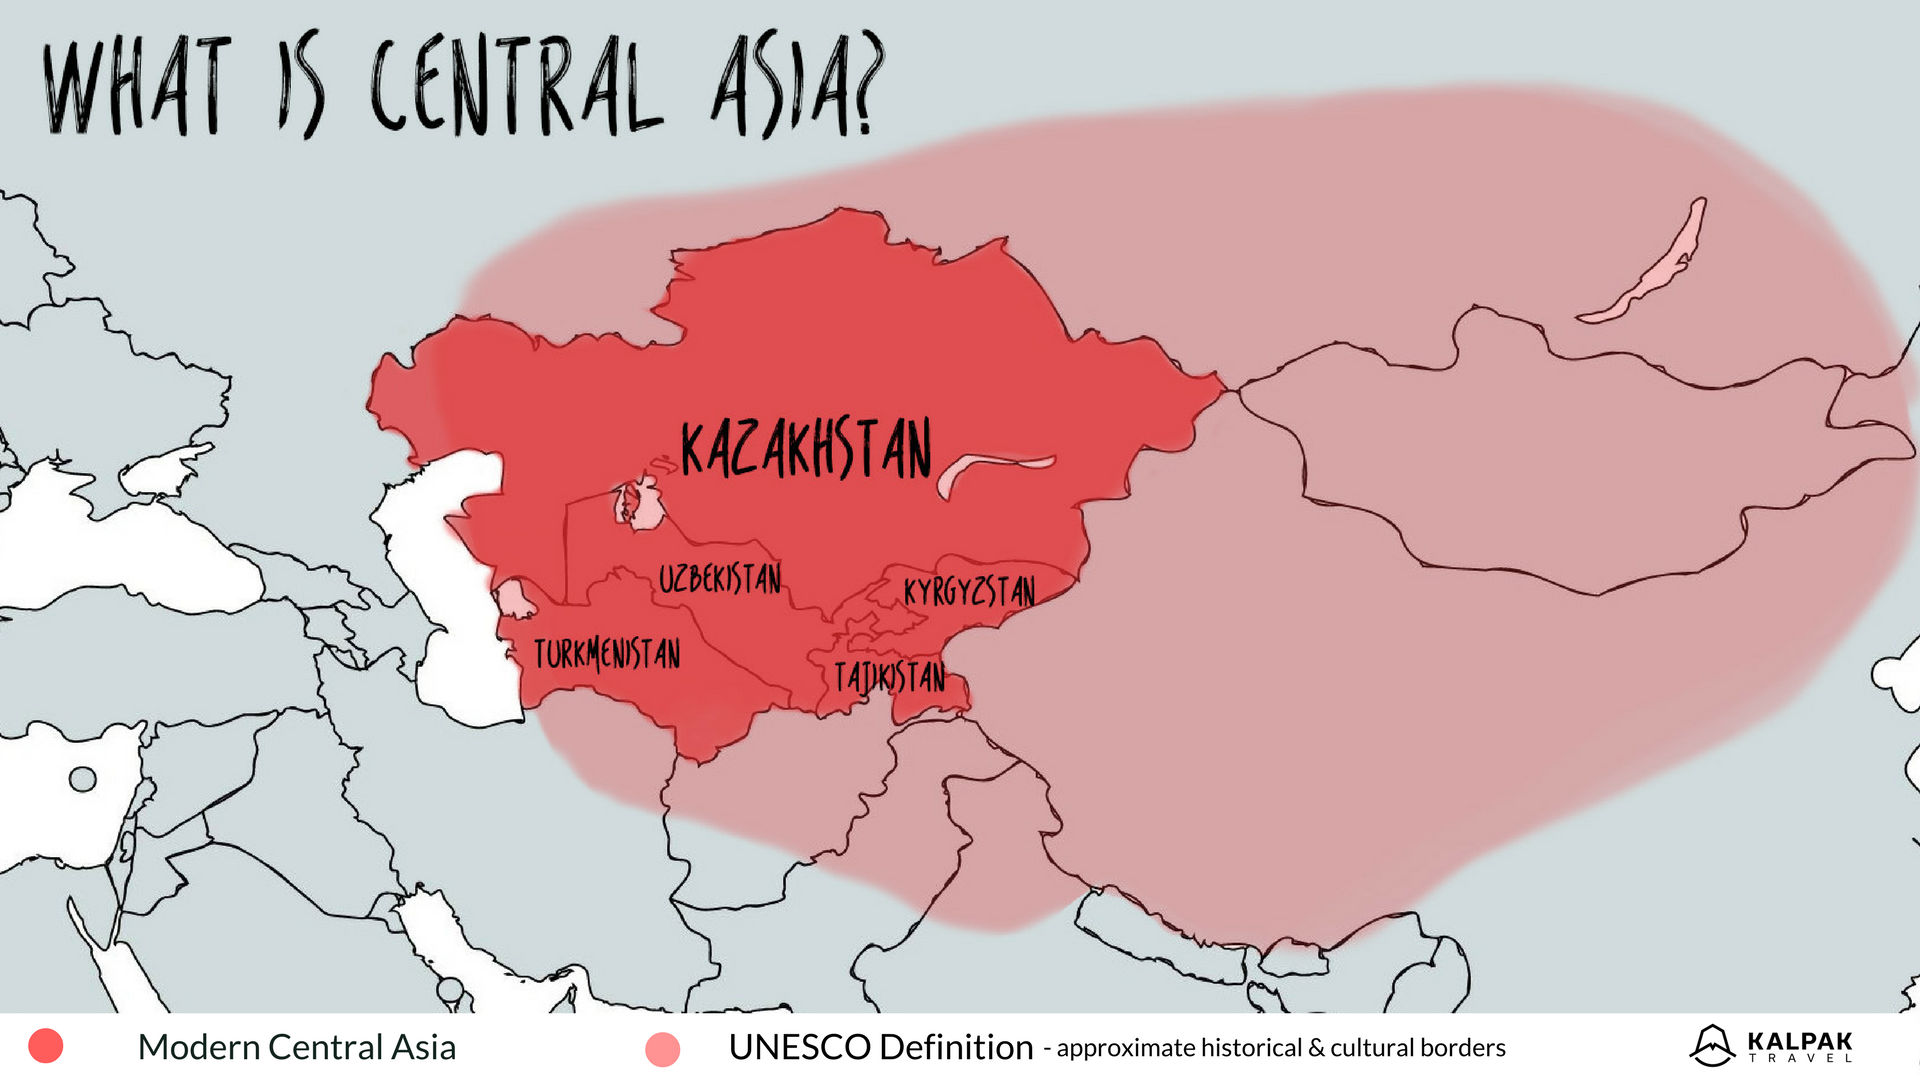 Central Asia map with modern definition borders and historical -cultural definition of UNESCO